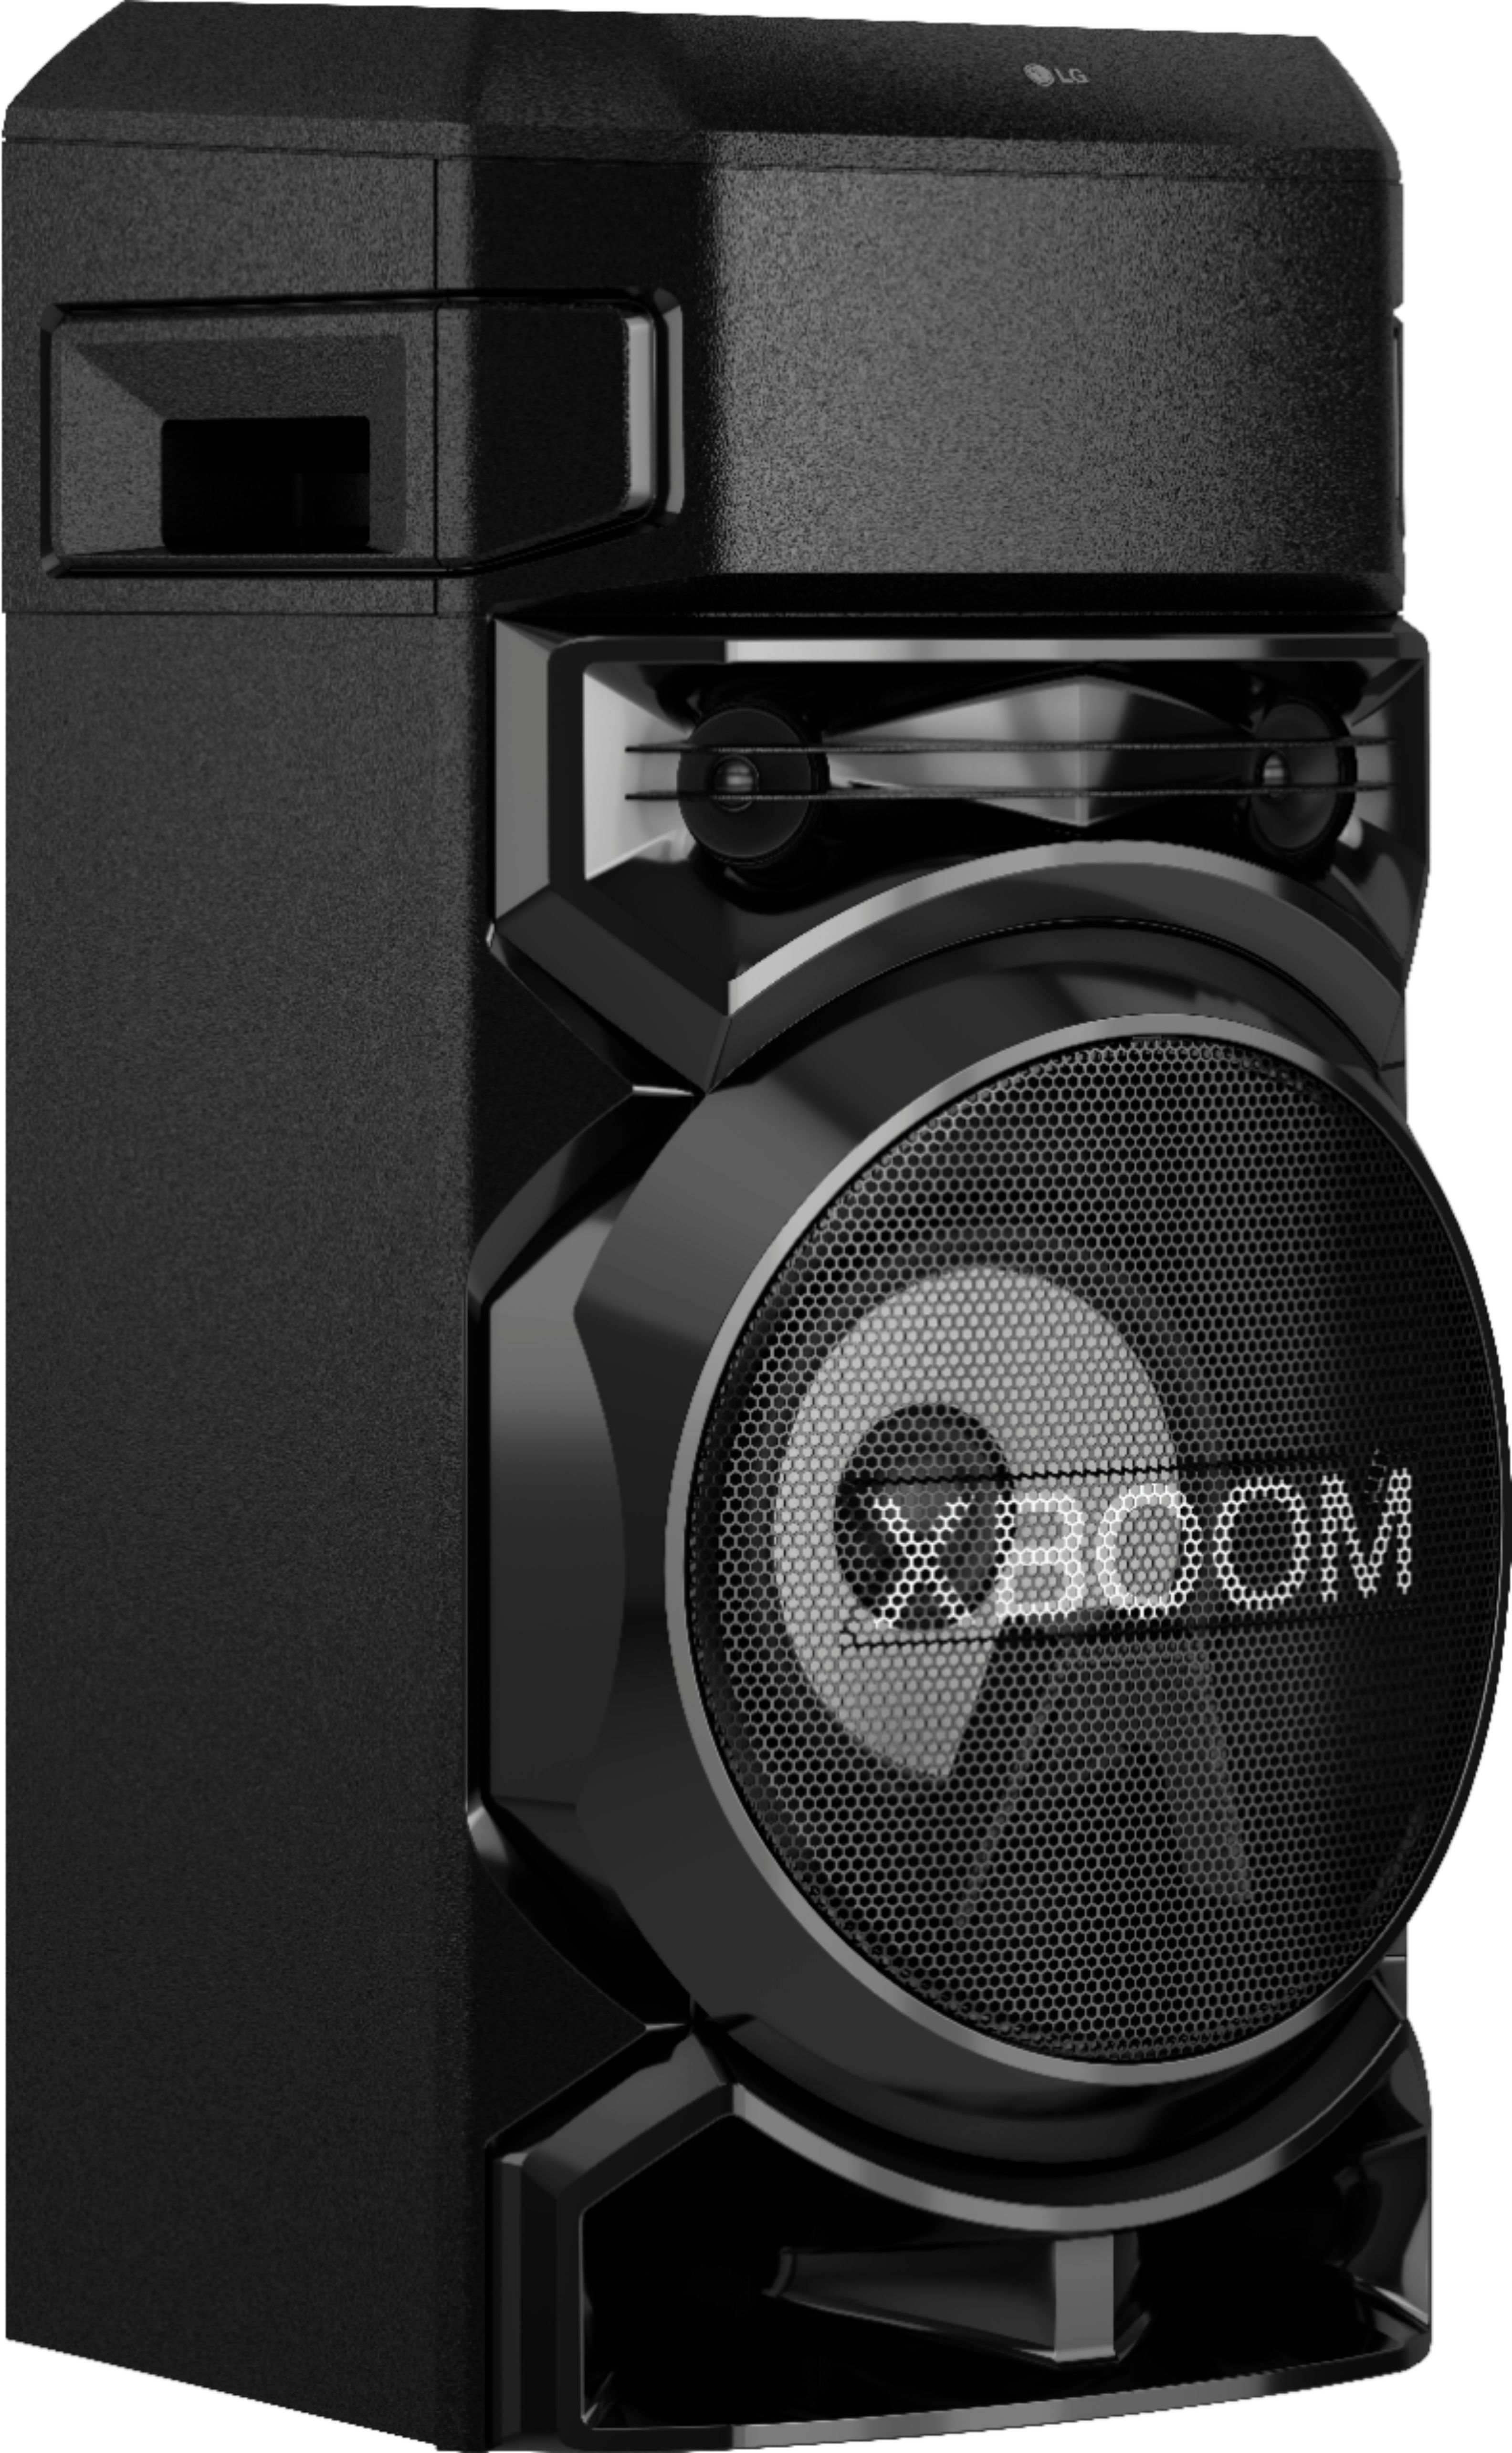 Angle View: LG - XBOOM Wireless Party Speaker - Black